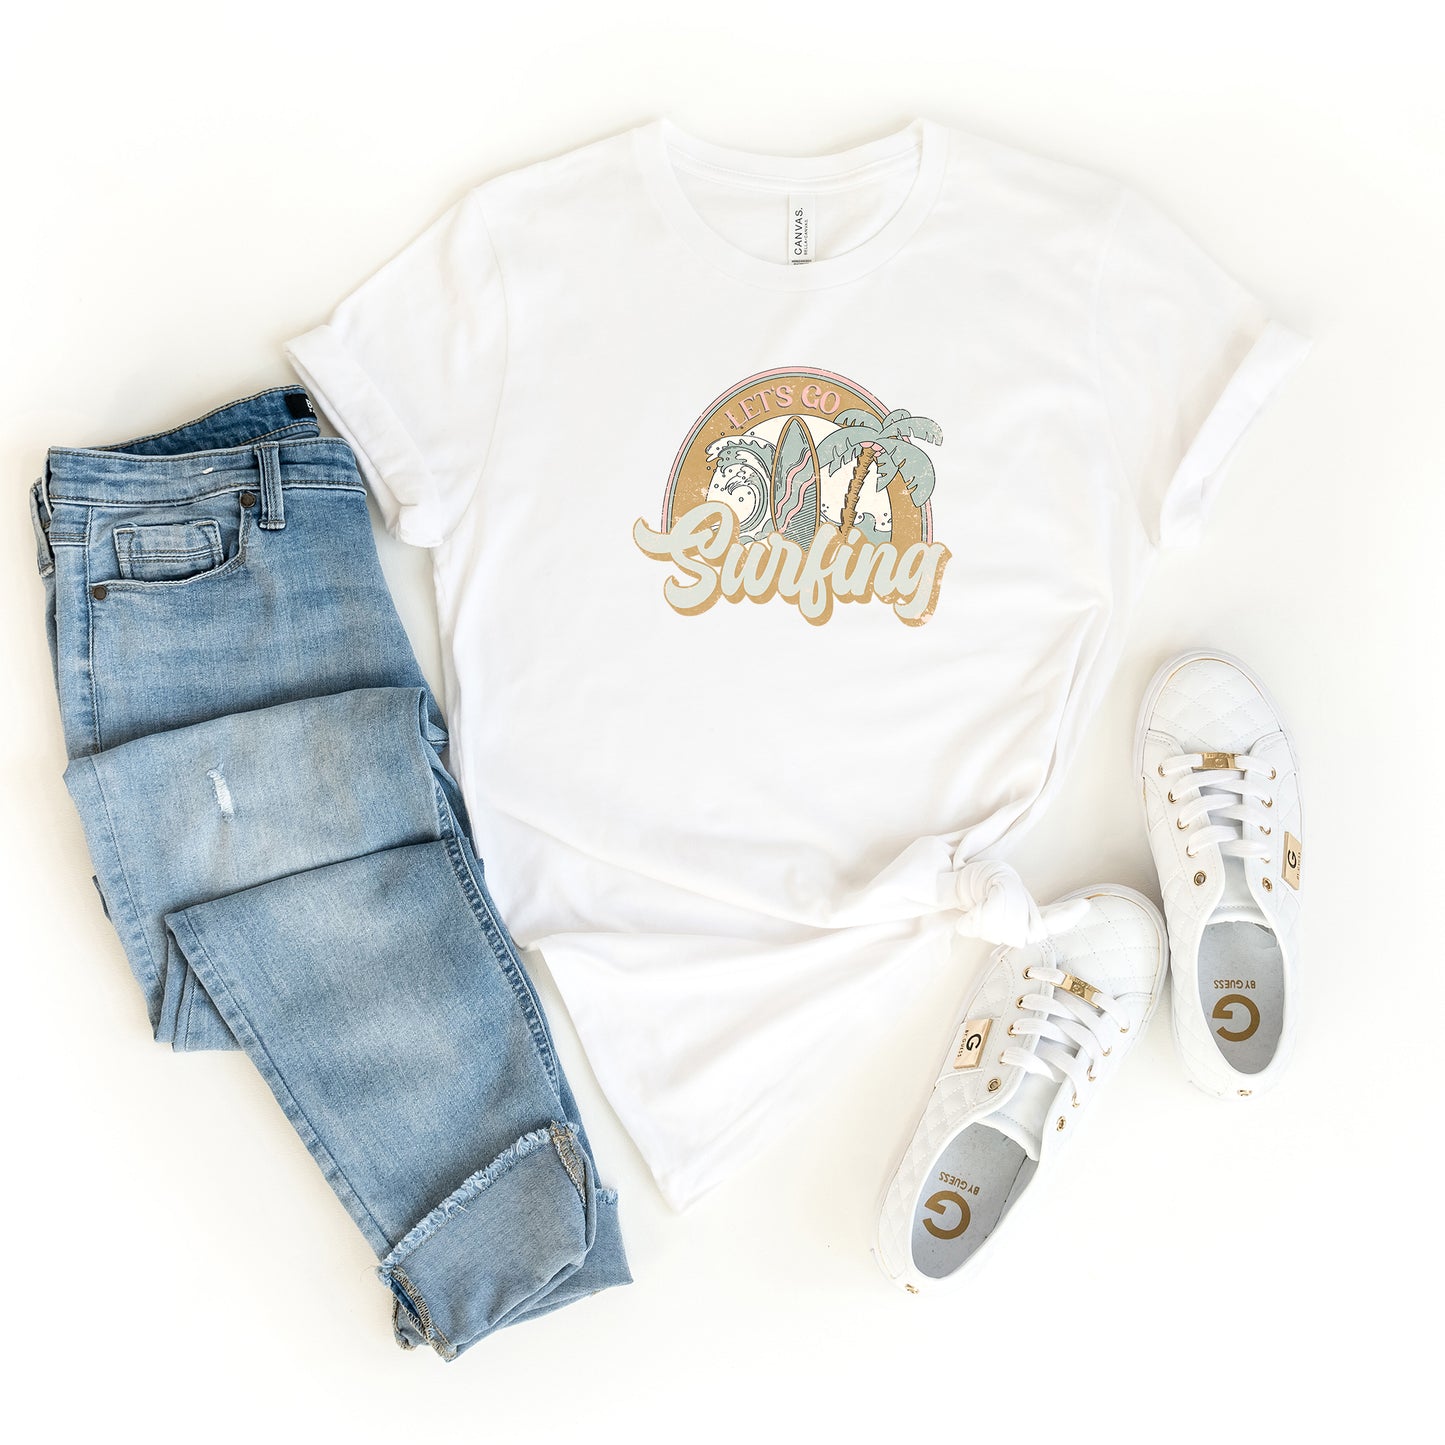 Let's Go Surfing | Short Sleeve Graphic Tee